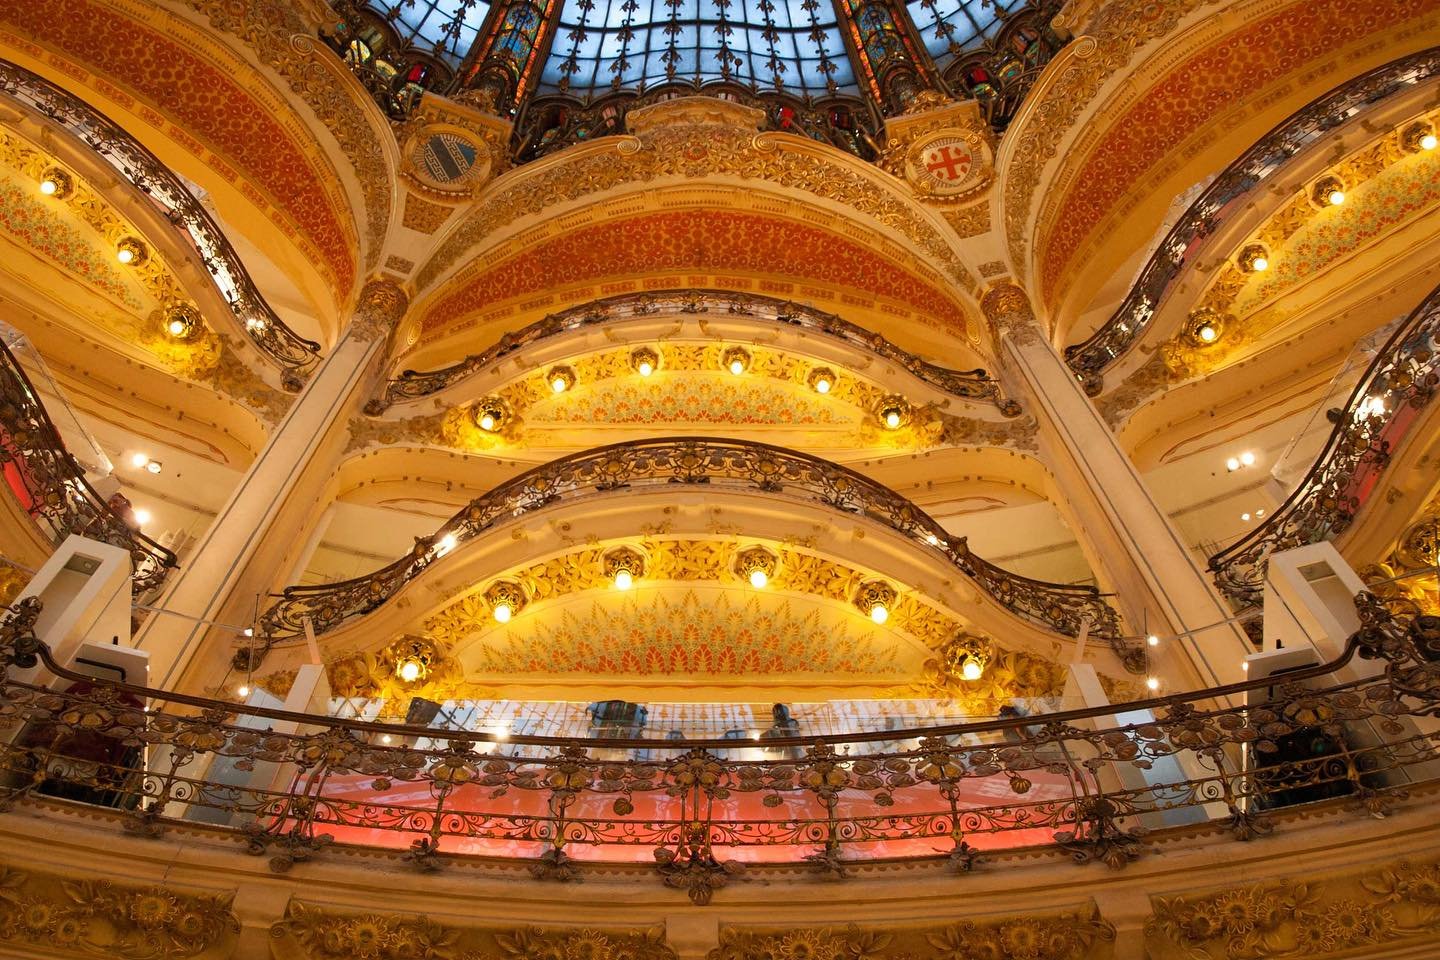 Galer&iacute;es Lafayette Paris Haussmann is a famous grand magasin in the 9th arrondissement. Even  if you don&rsquo;t buy anything, it&rsquo;s worth visiting to see the beautifully ornate ceiling and at Christmastime, the decorations are amazing.
#